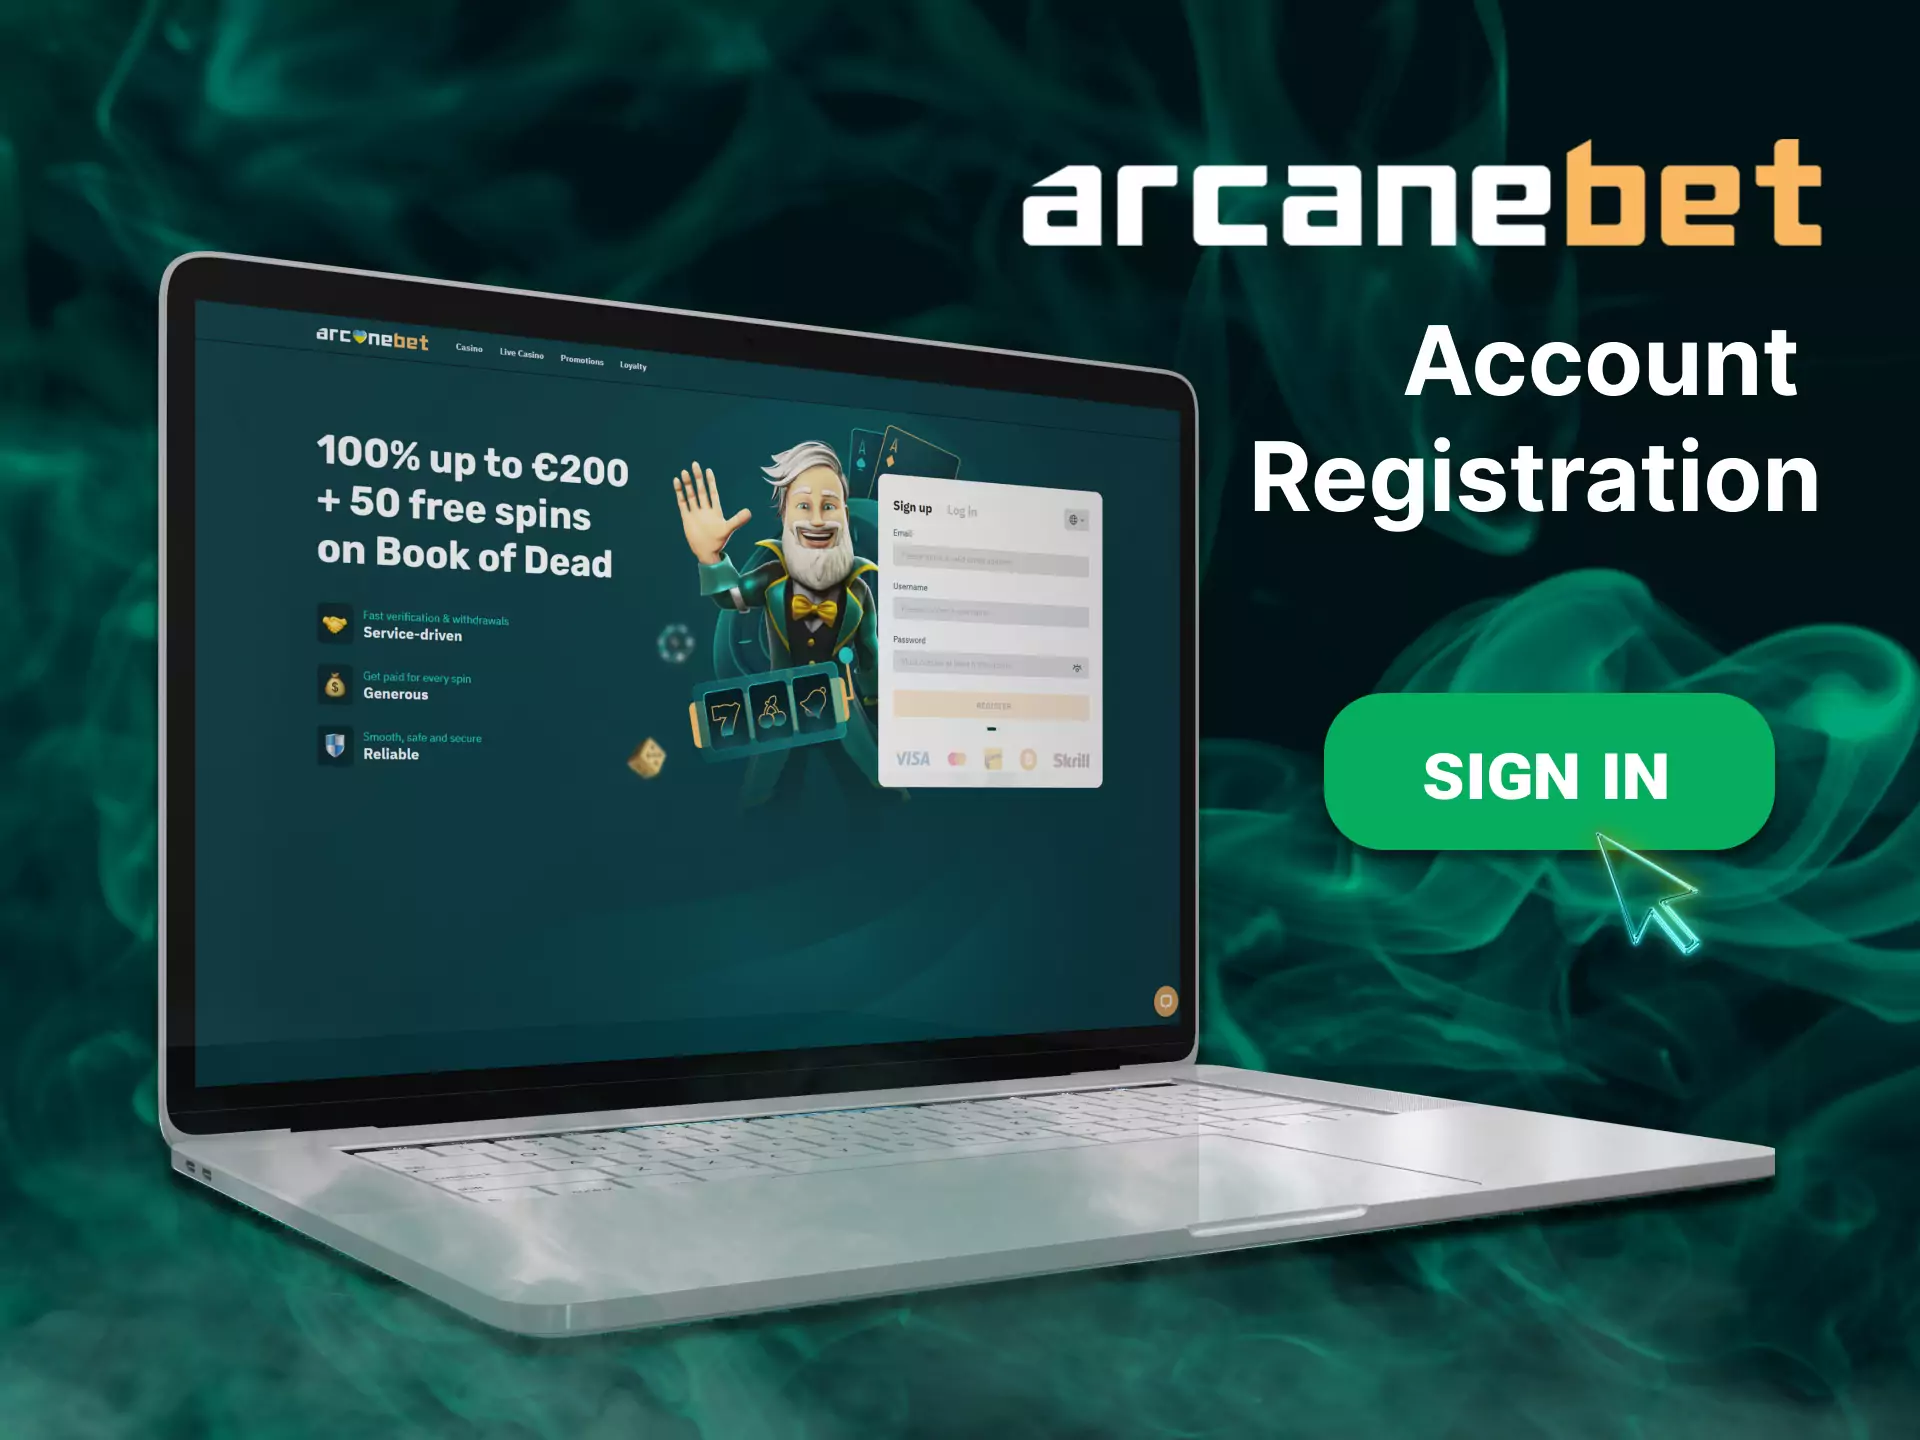 Go through a simple and quick registration of Arcanebet.